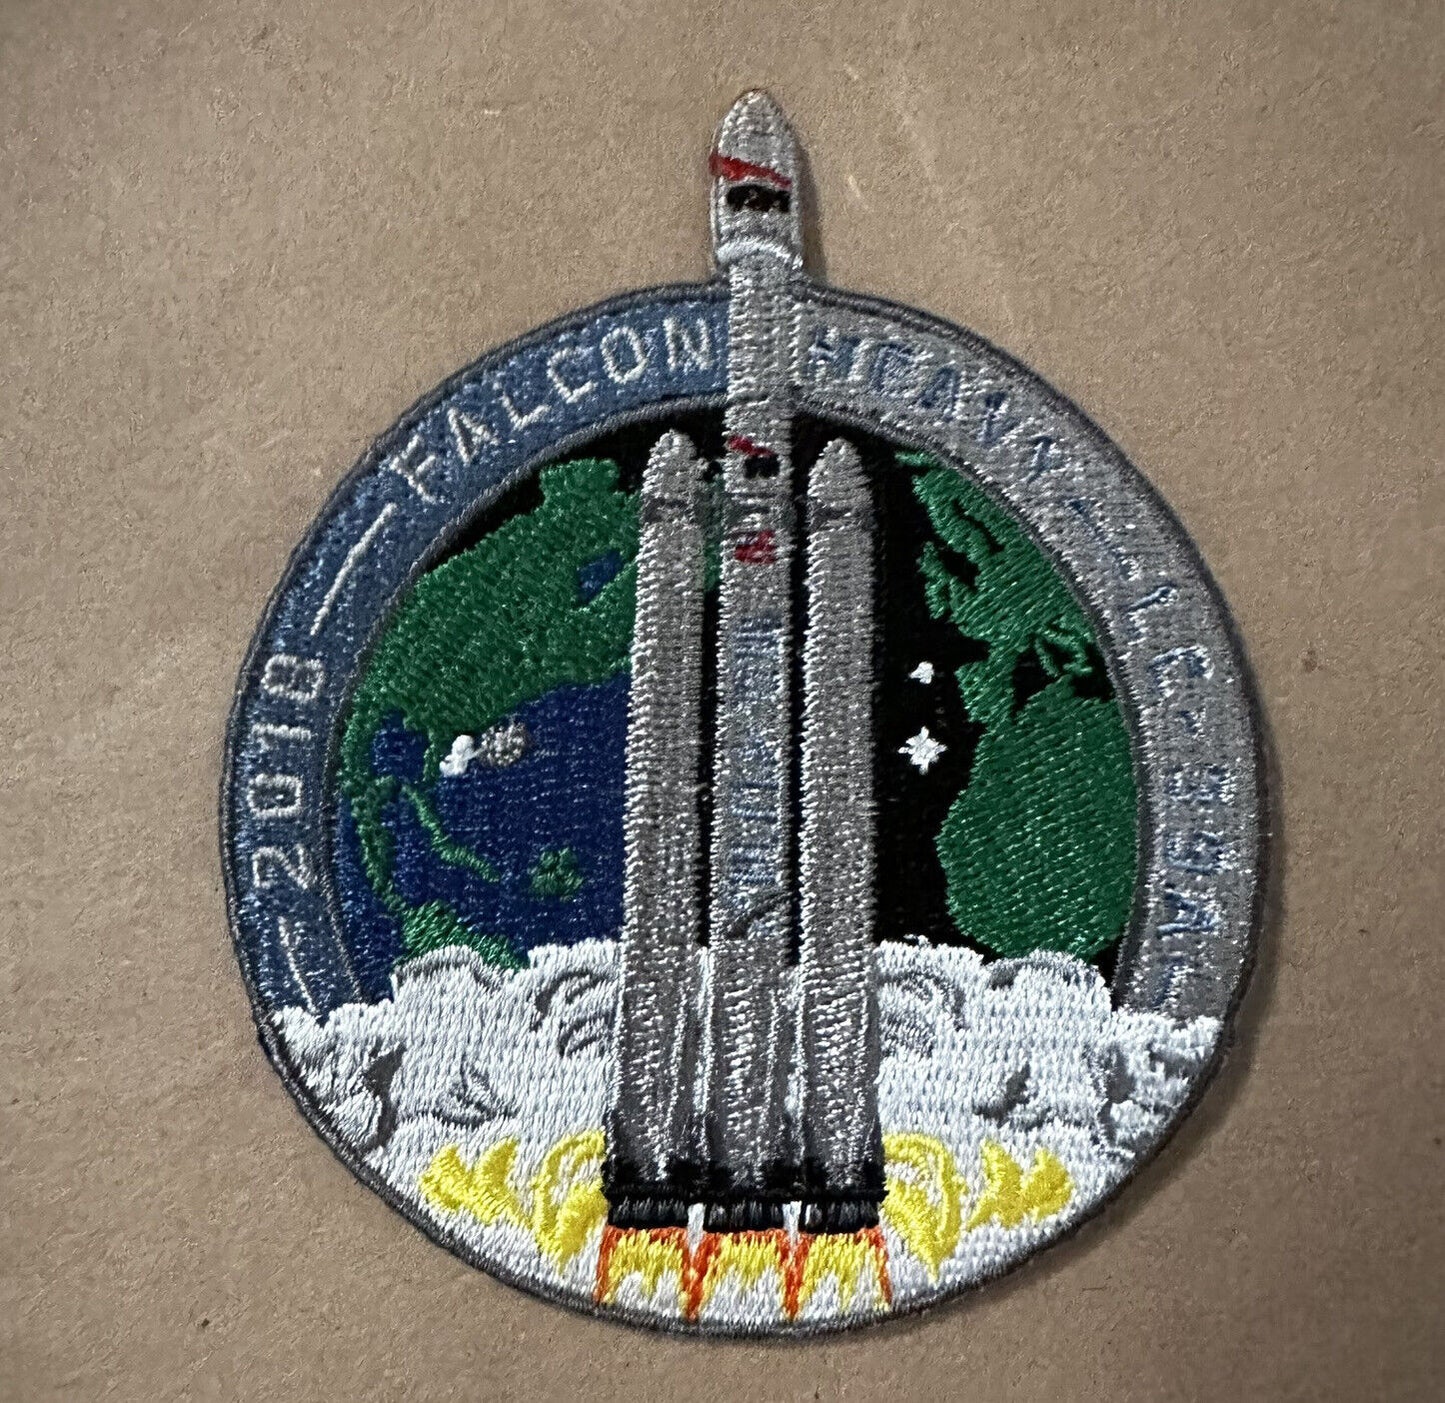 Original SpaceX FALCON HEAVY 2018 First Launch Mission Patch NASA Falcon 9 3”